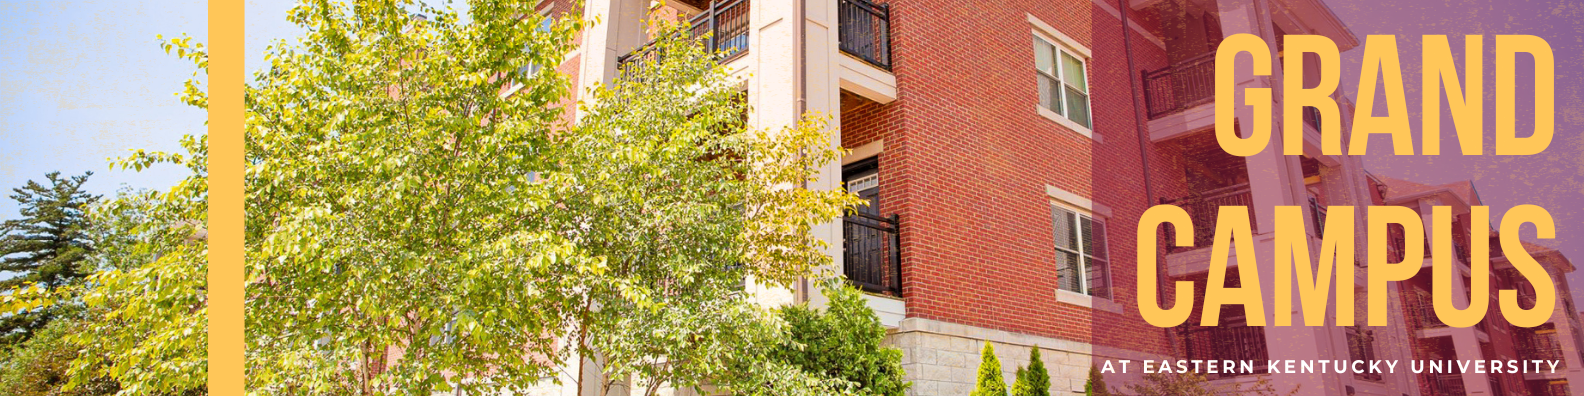 An image of Grand Campus at EKU, with the text "Grand Campus Apartments".